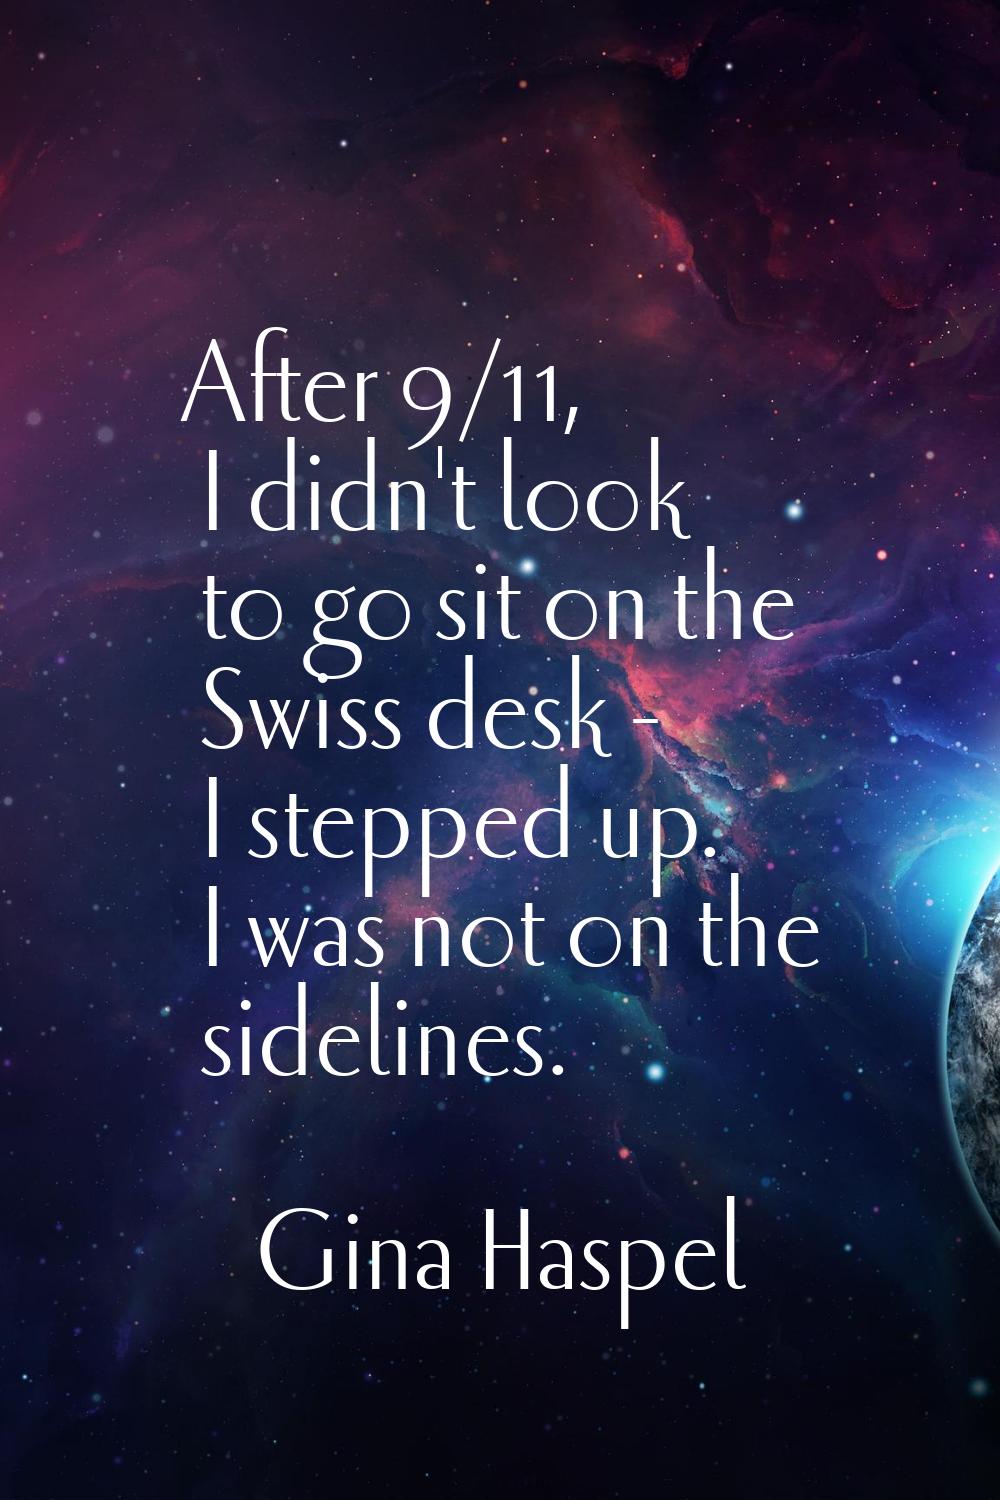 After 9/11, I didn't look to go sit on the Swiss desk - I stepped up. I was not on the sidelines.